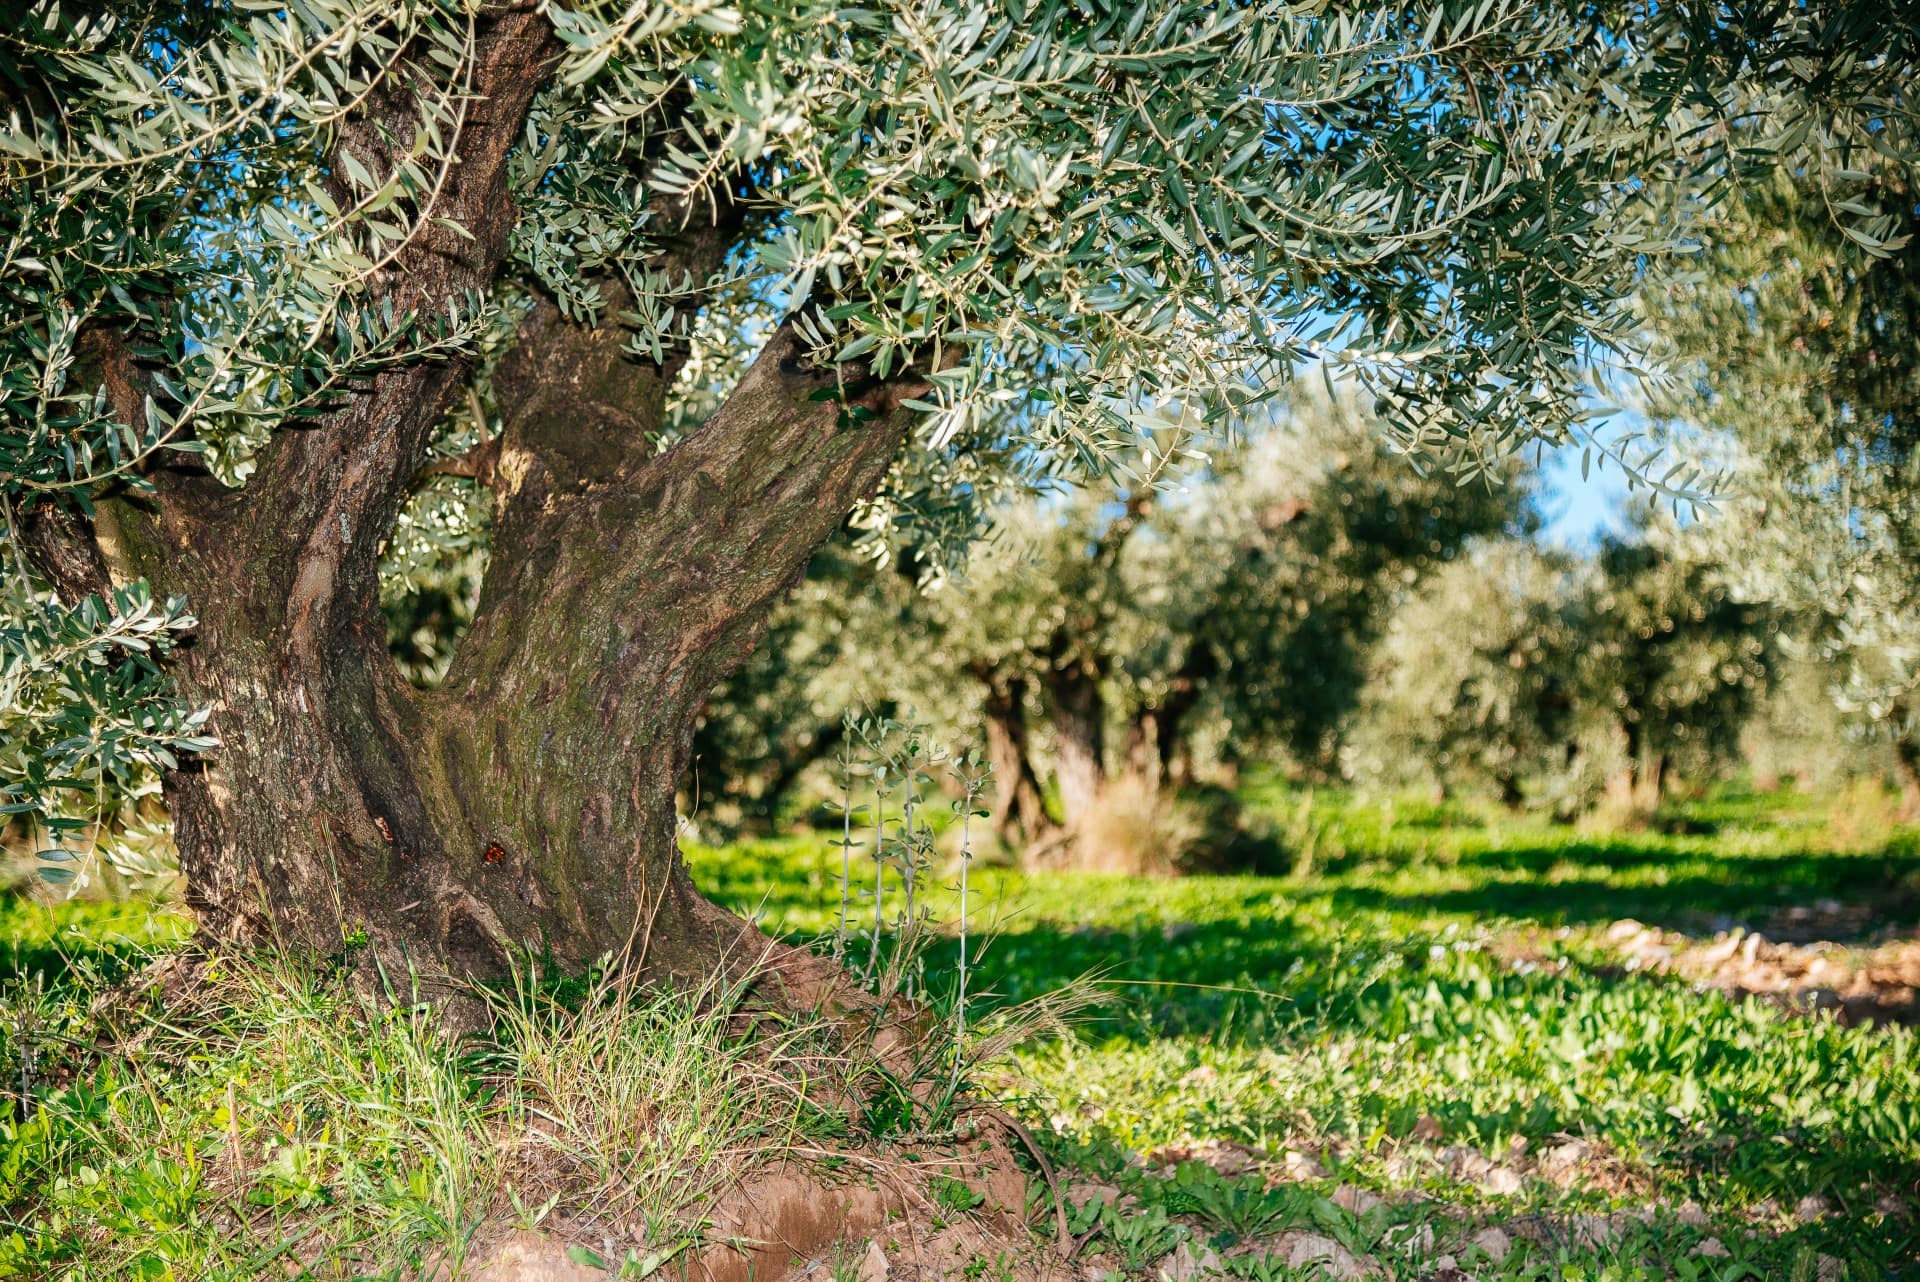 europe-profiles-the-best-olive-oils-production-a-family-trade-takes-root-at-moulin-de-la-coquille-olive-oil-times